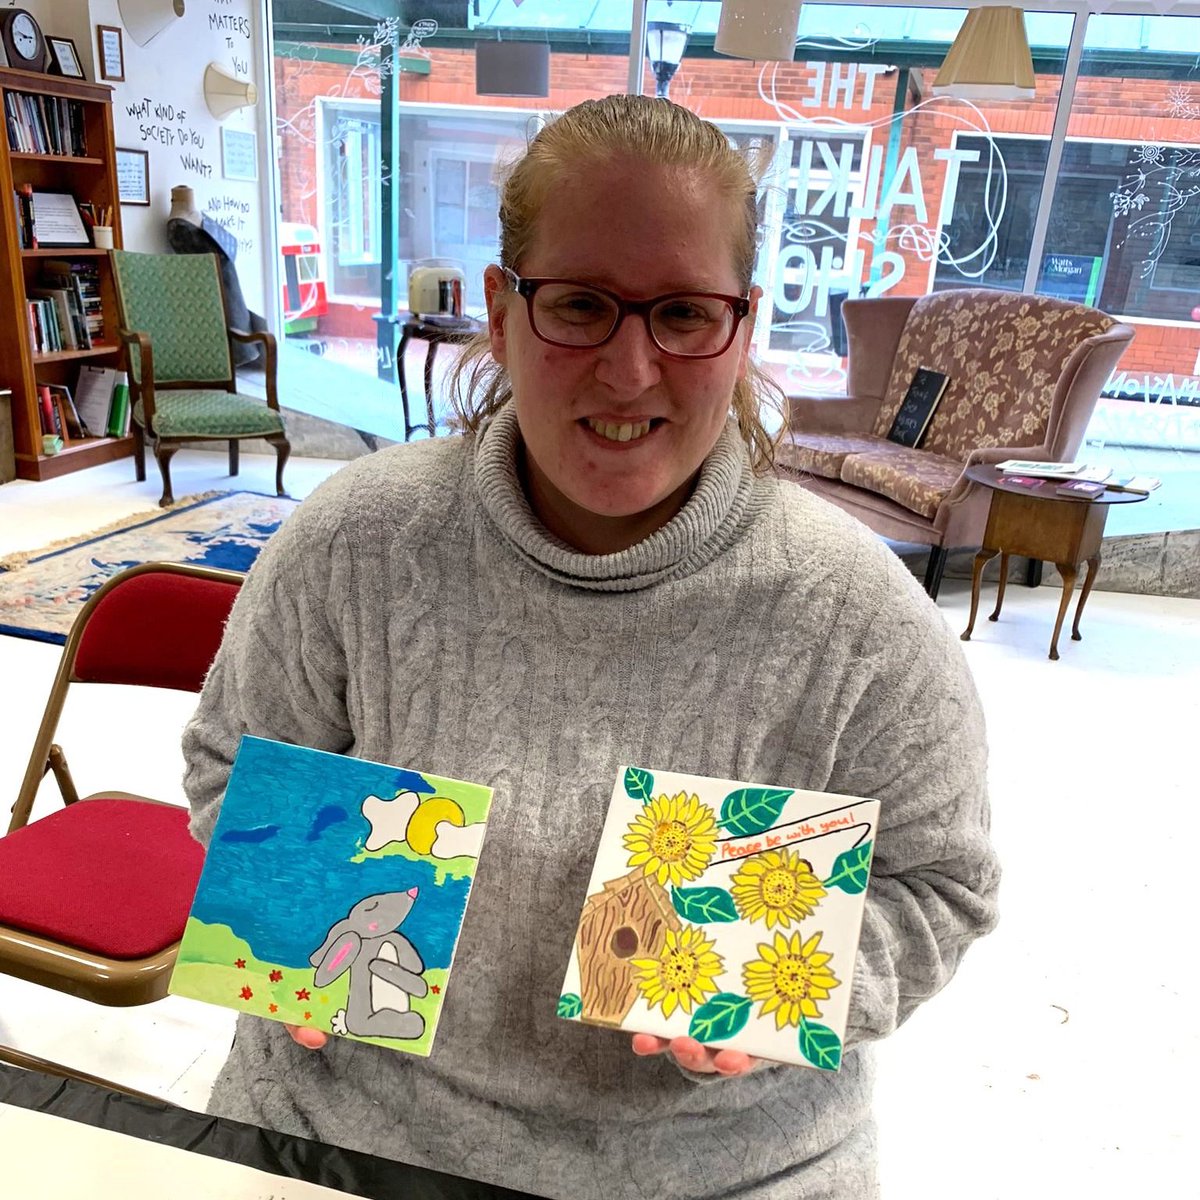 Check out Christina's creations from our tile painting workshop yesterday! Fancy getting crafty? We've got free crochet, drawing, writing and making all this week at The Talking Shop! ✂️ #Blackwood